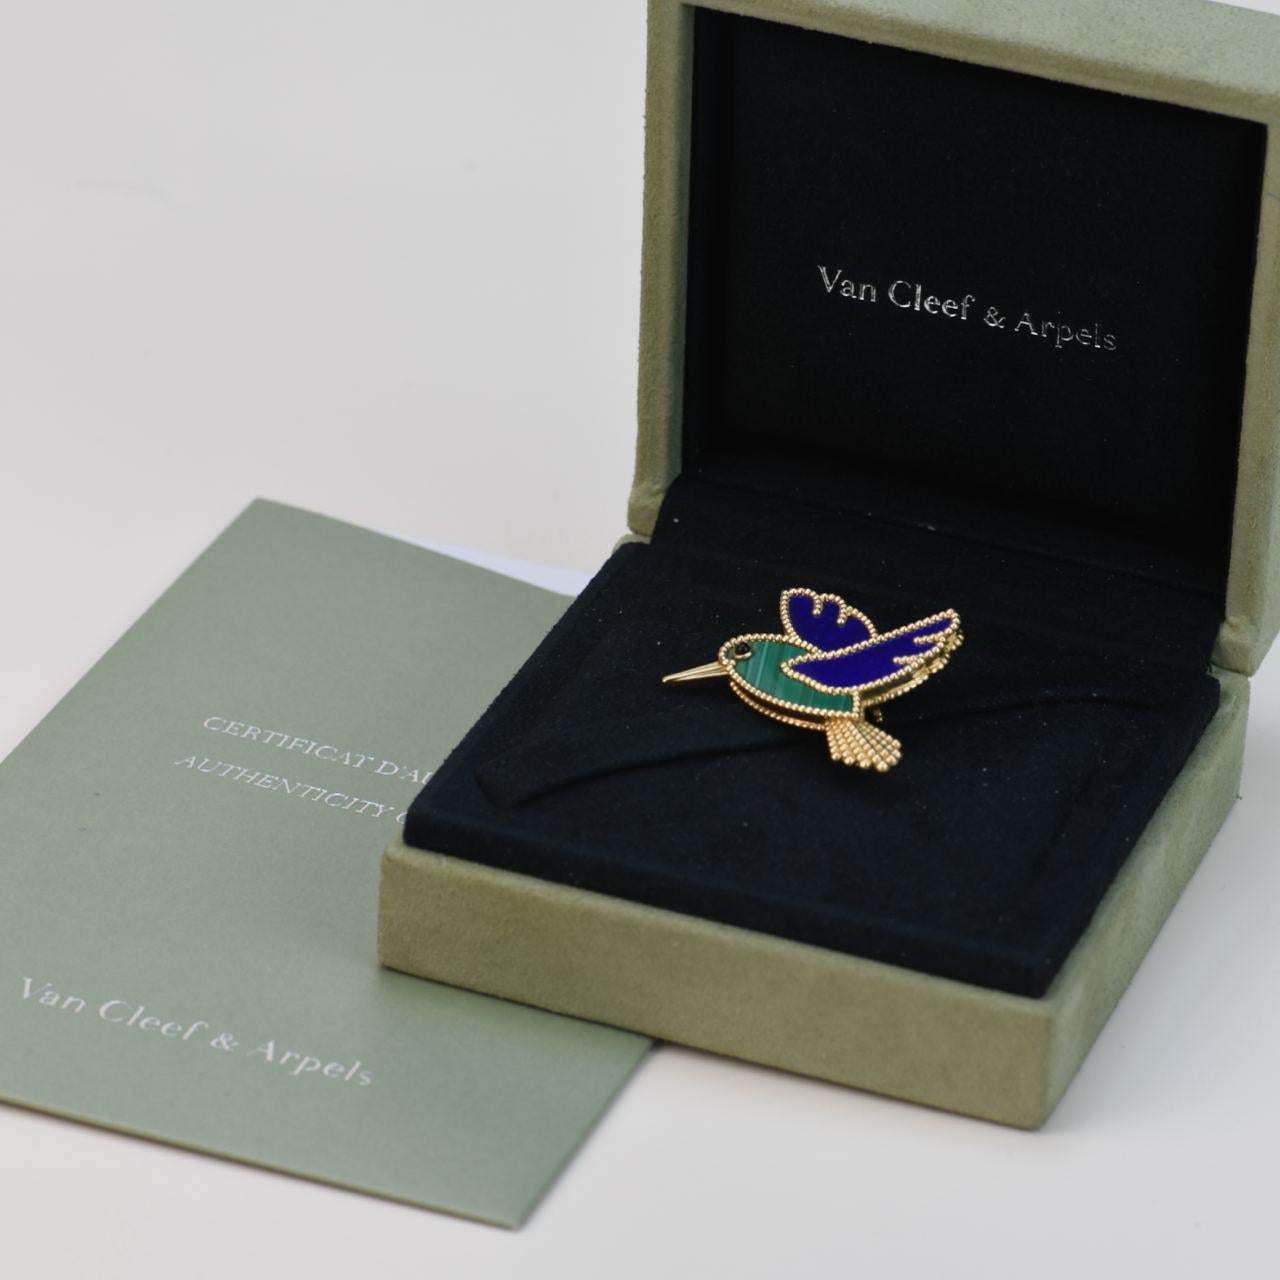 SKU	CT-2403
Comes With	Full Set (Box + Card)
Date	2019
Model	Lucky Animals
Serial Number	VCARP2B000
Metal	18k Yellow Gold
Stones	Sapphire, Lapis Lazuli, Malachite
Weight	Approx 14.7 g
Condition	Excellent
Other Info	Size:Approx 4.2 x Approx 3.8